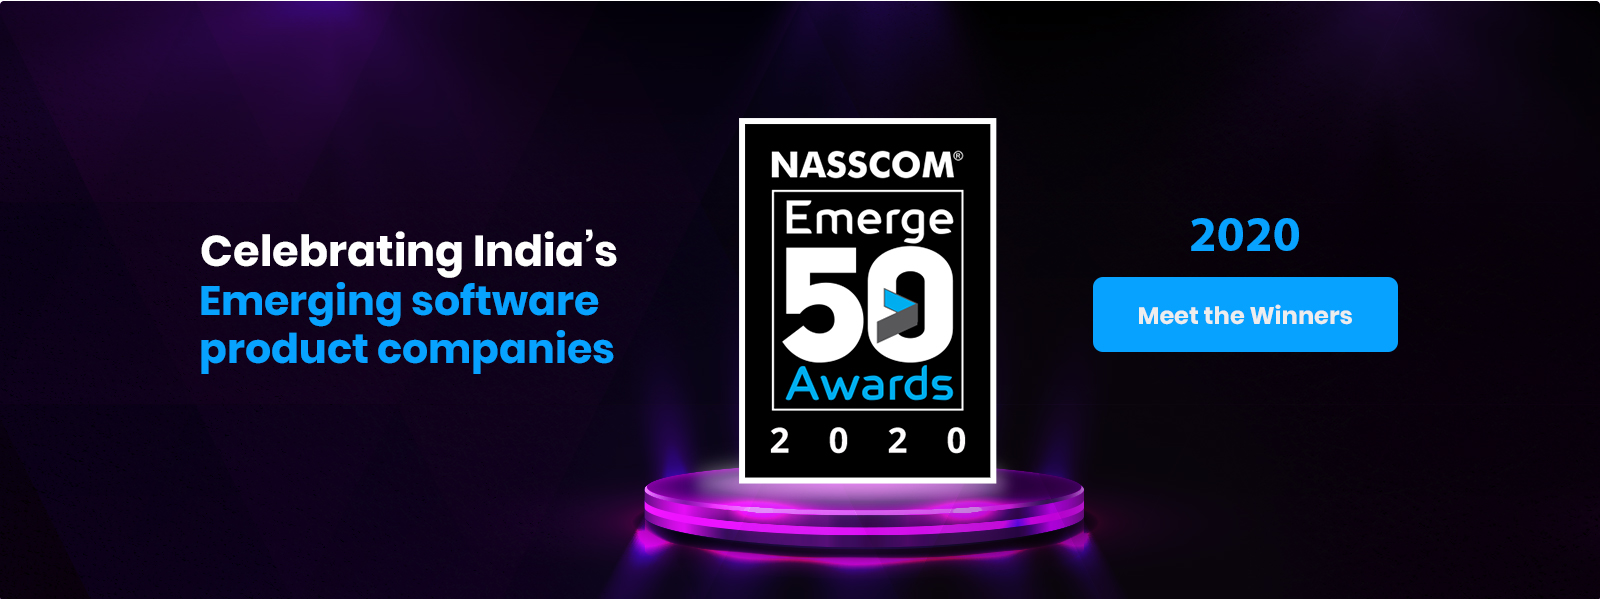 Celebrating India’s emerging software product companies